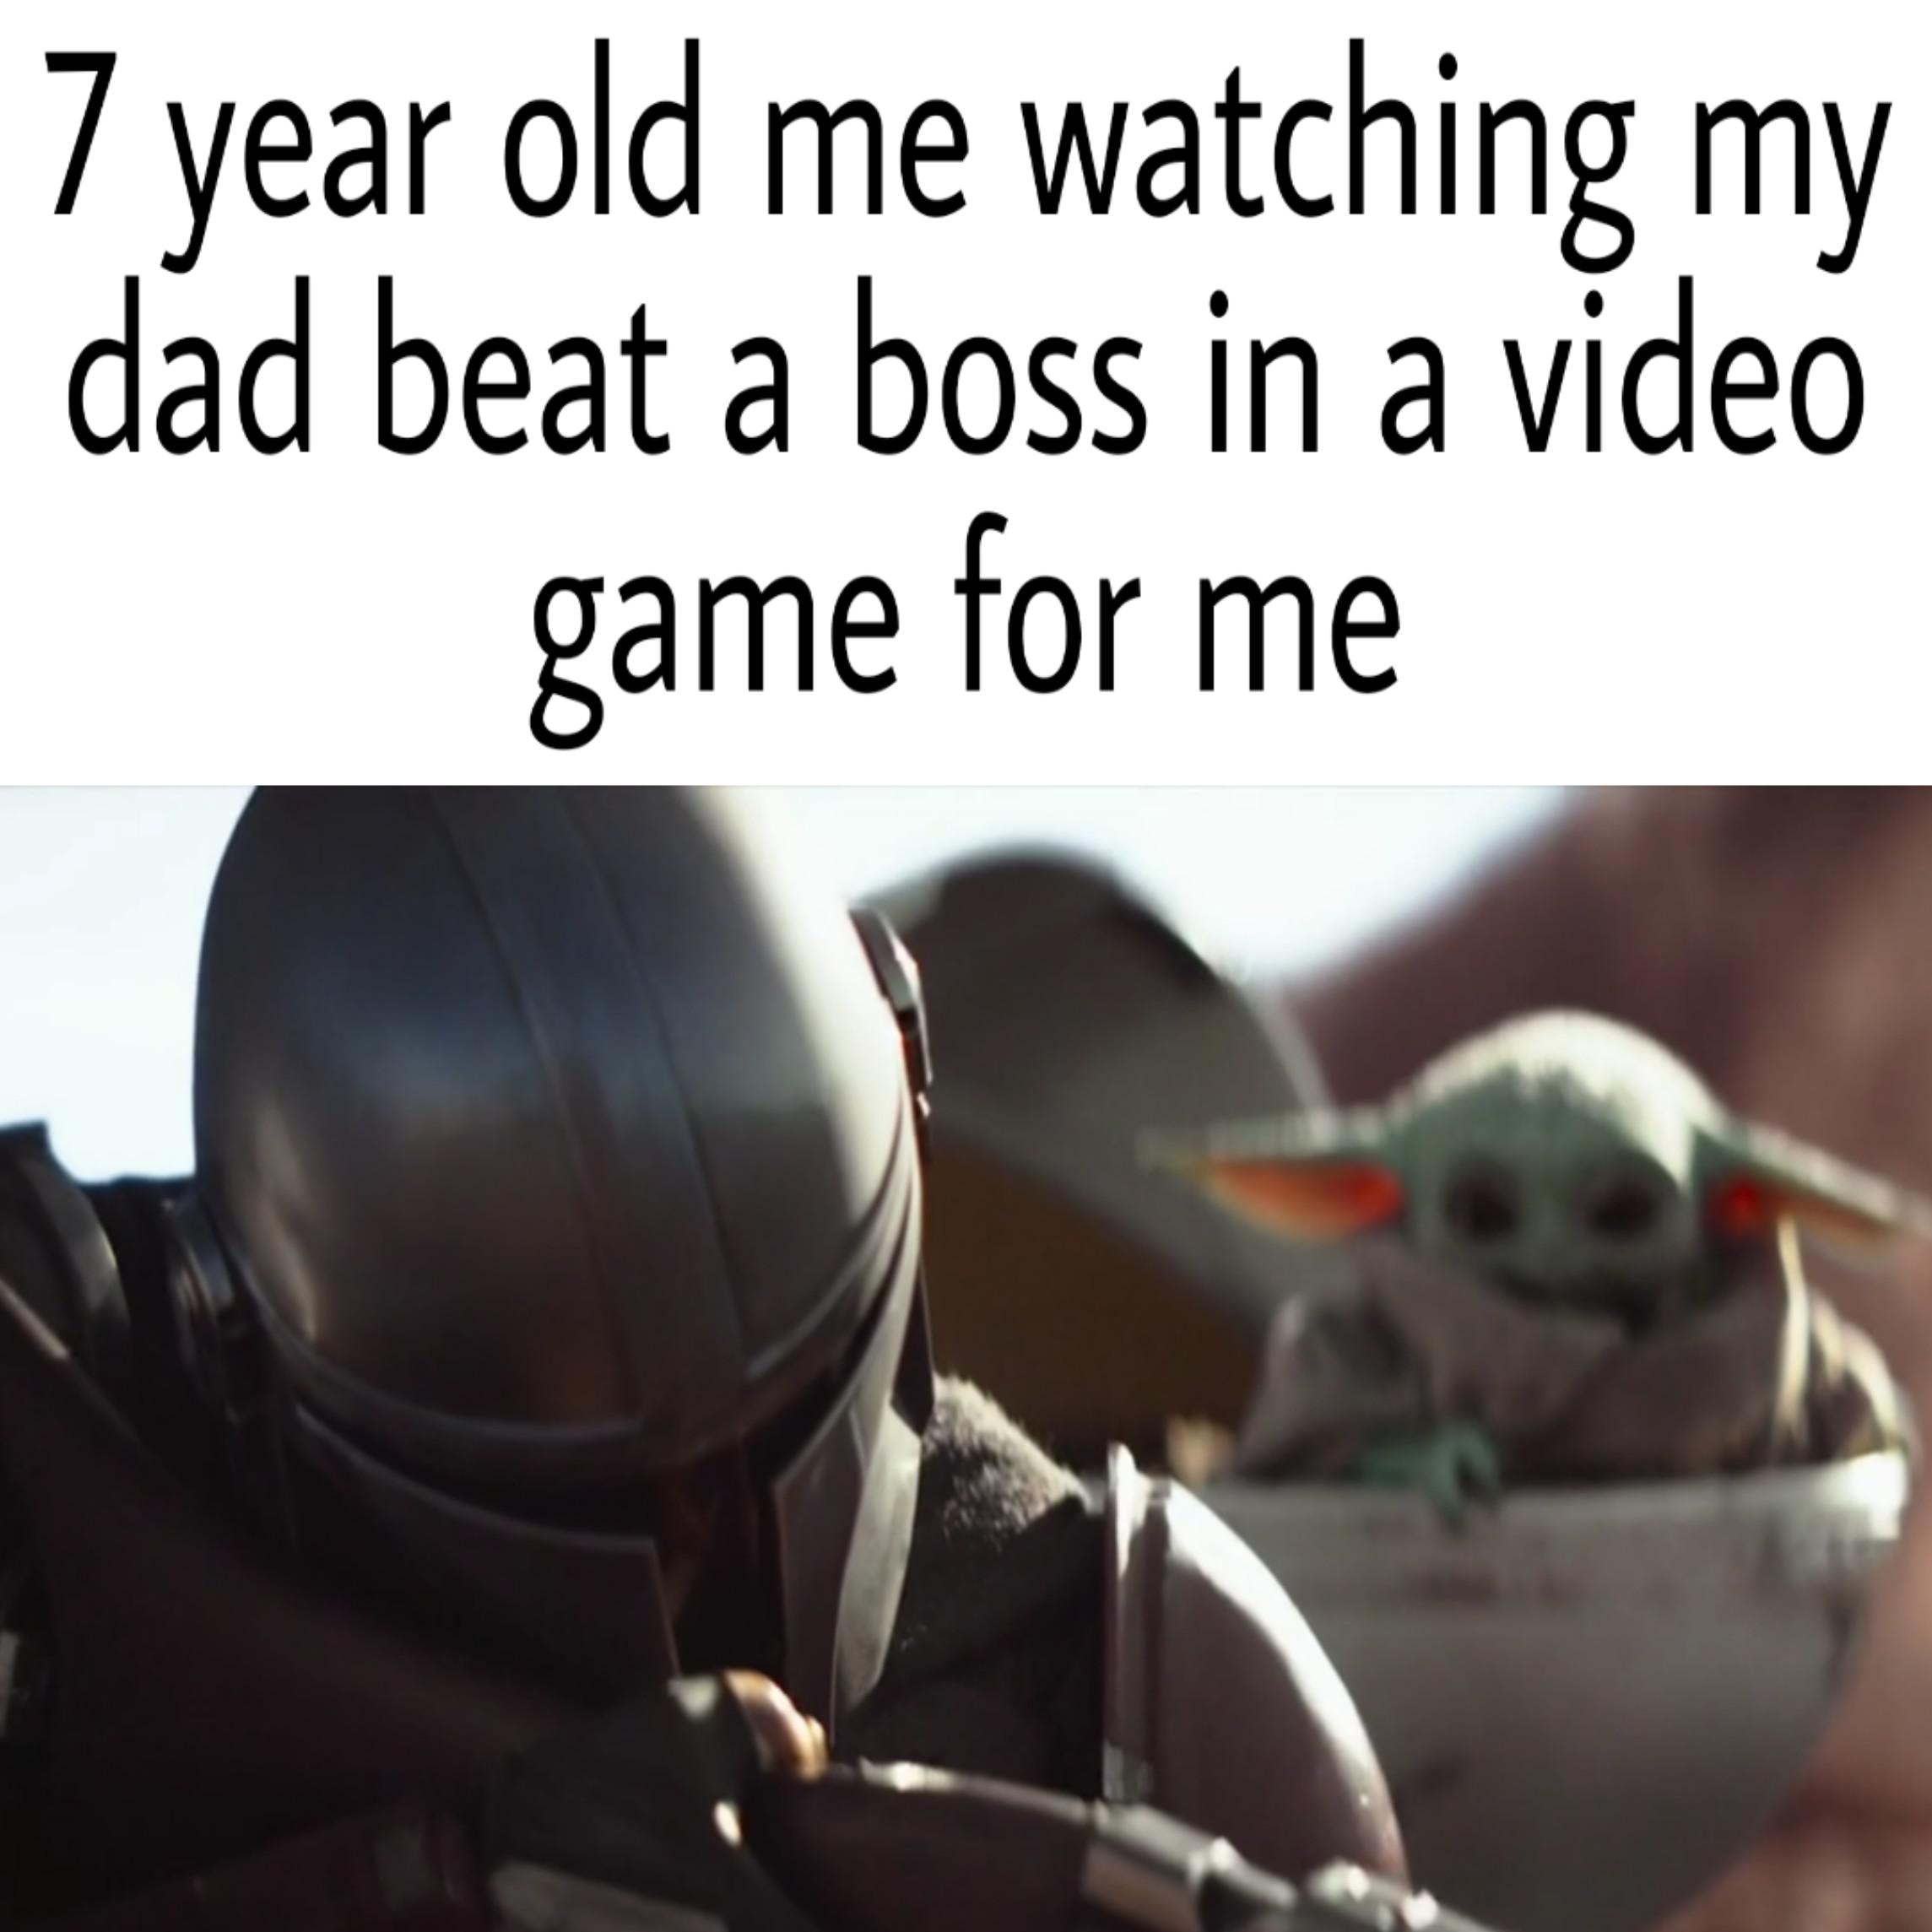 sequel-memes star-wars-memes sequel-memes text: 7 year old me watching my dad beat a boss in a video game for me 